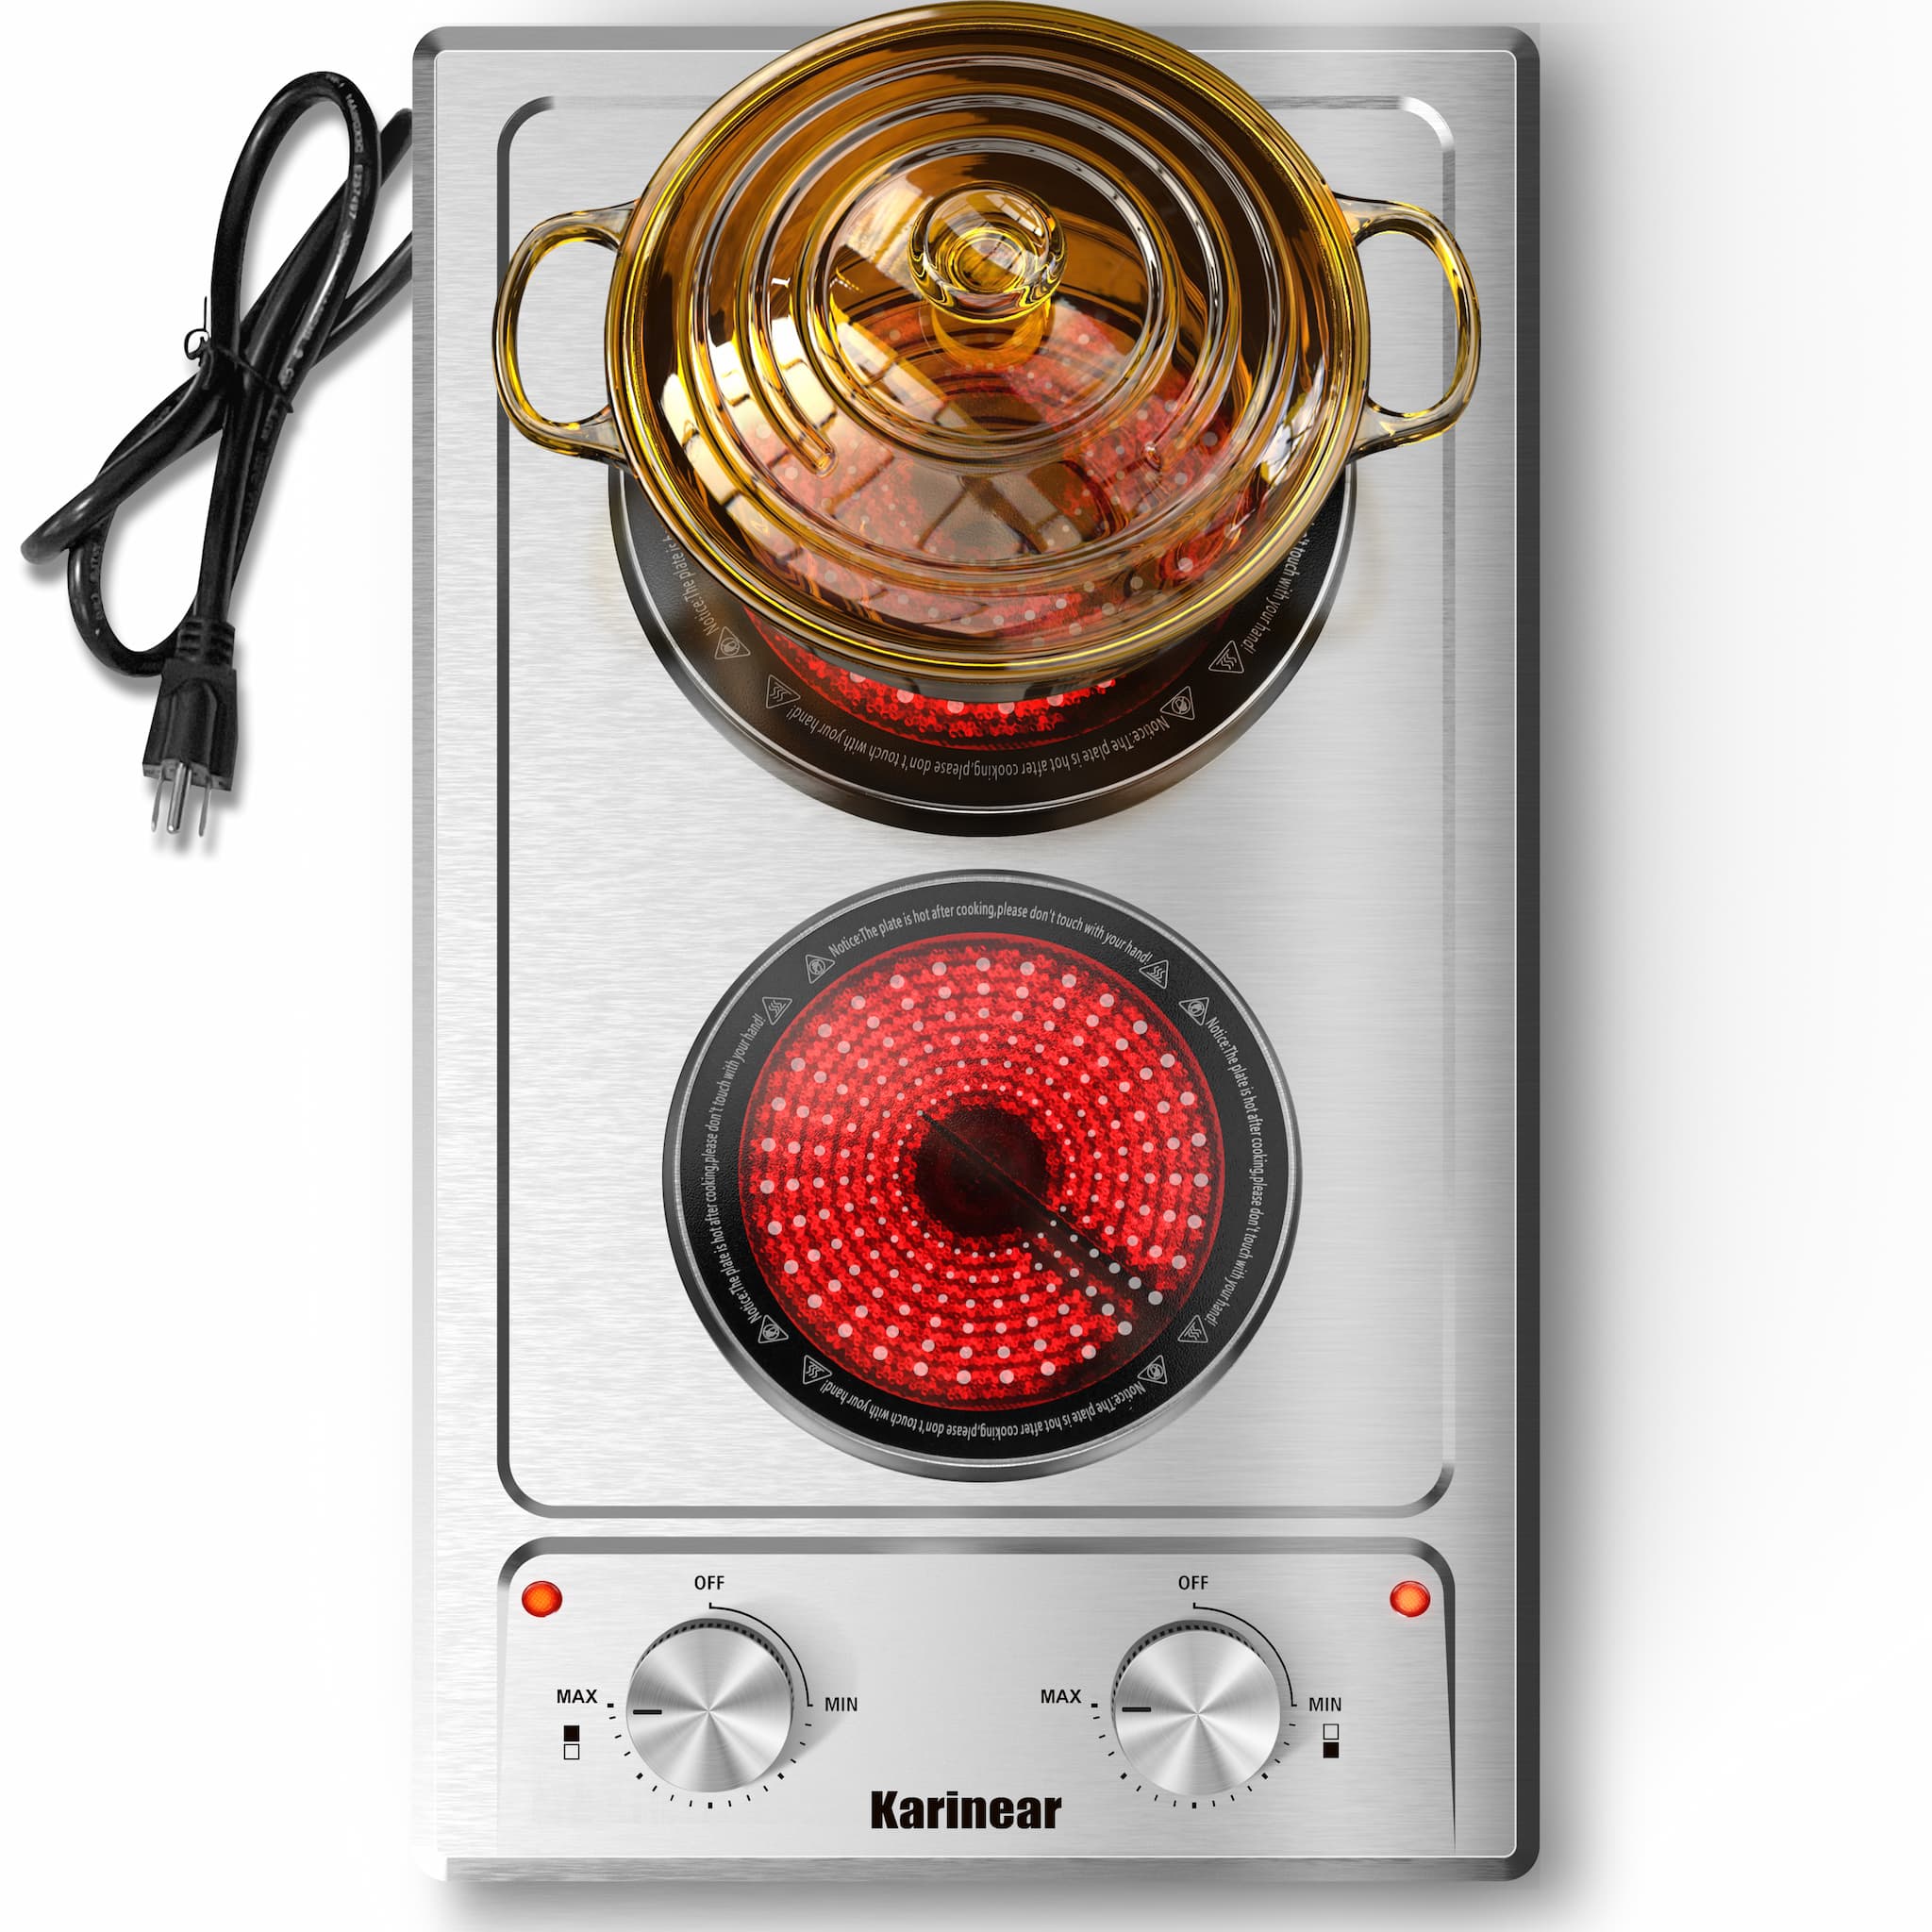 Karinear Electric Cooktop 110V, 12'' Stainless Steel Built-in and Countertop Electric Stove top 2 Burners with Knob Control, 16 Power Levels,Over-Heat Protection, Electric Ceramic Cooktop with Plug in